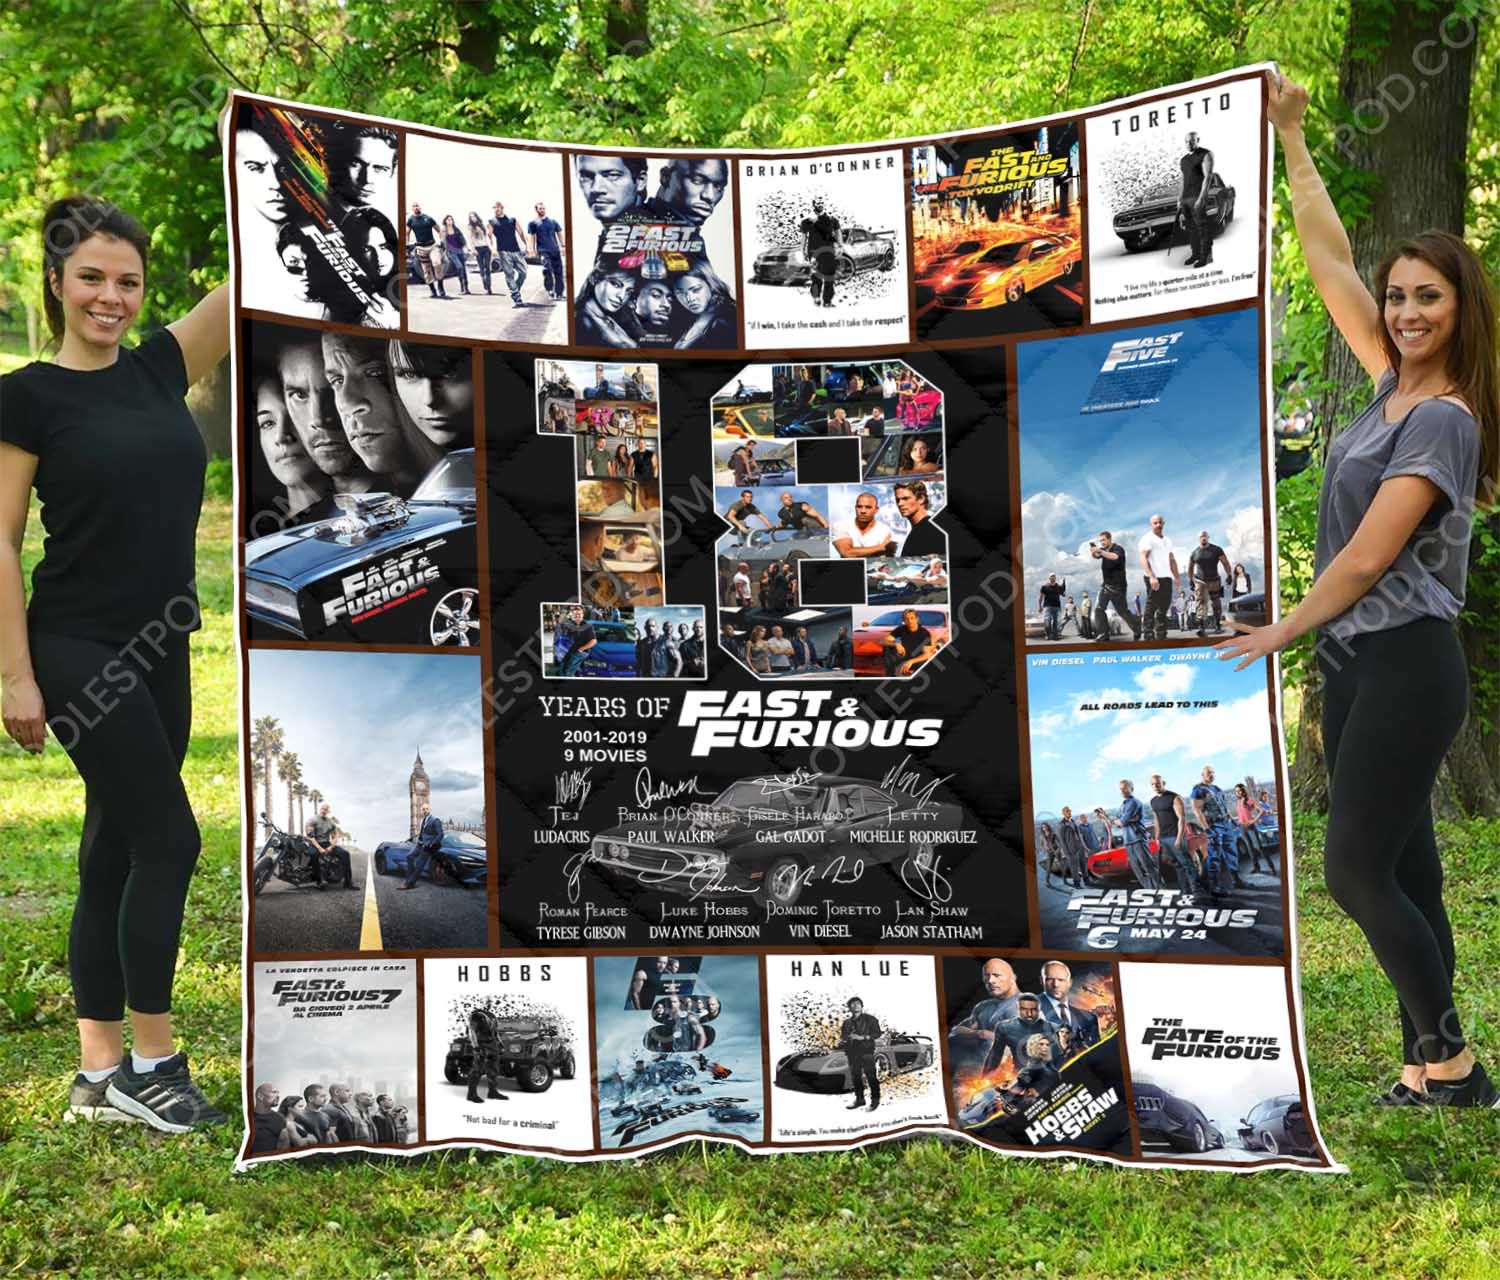 18 Years Of Fast And Furious 2001-2019 9 Movies Signatures Quilt Blanket